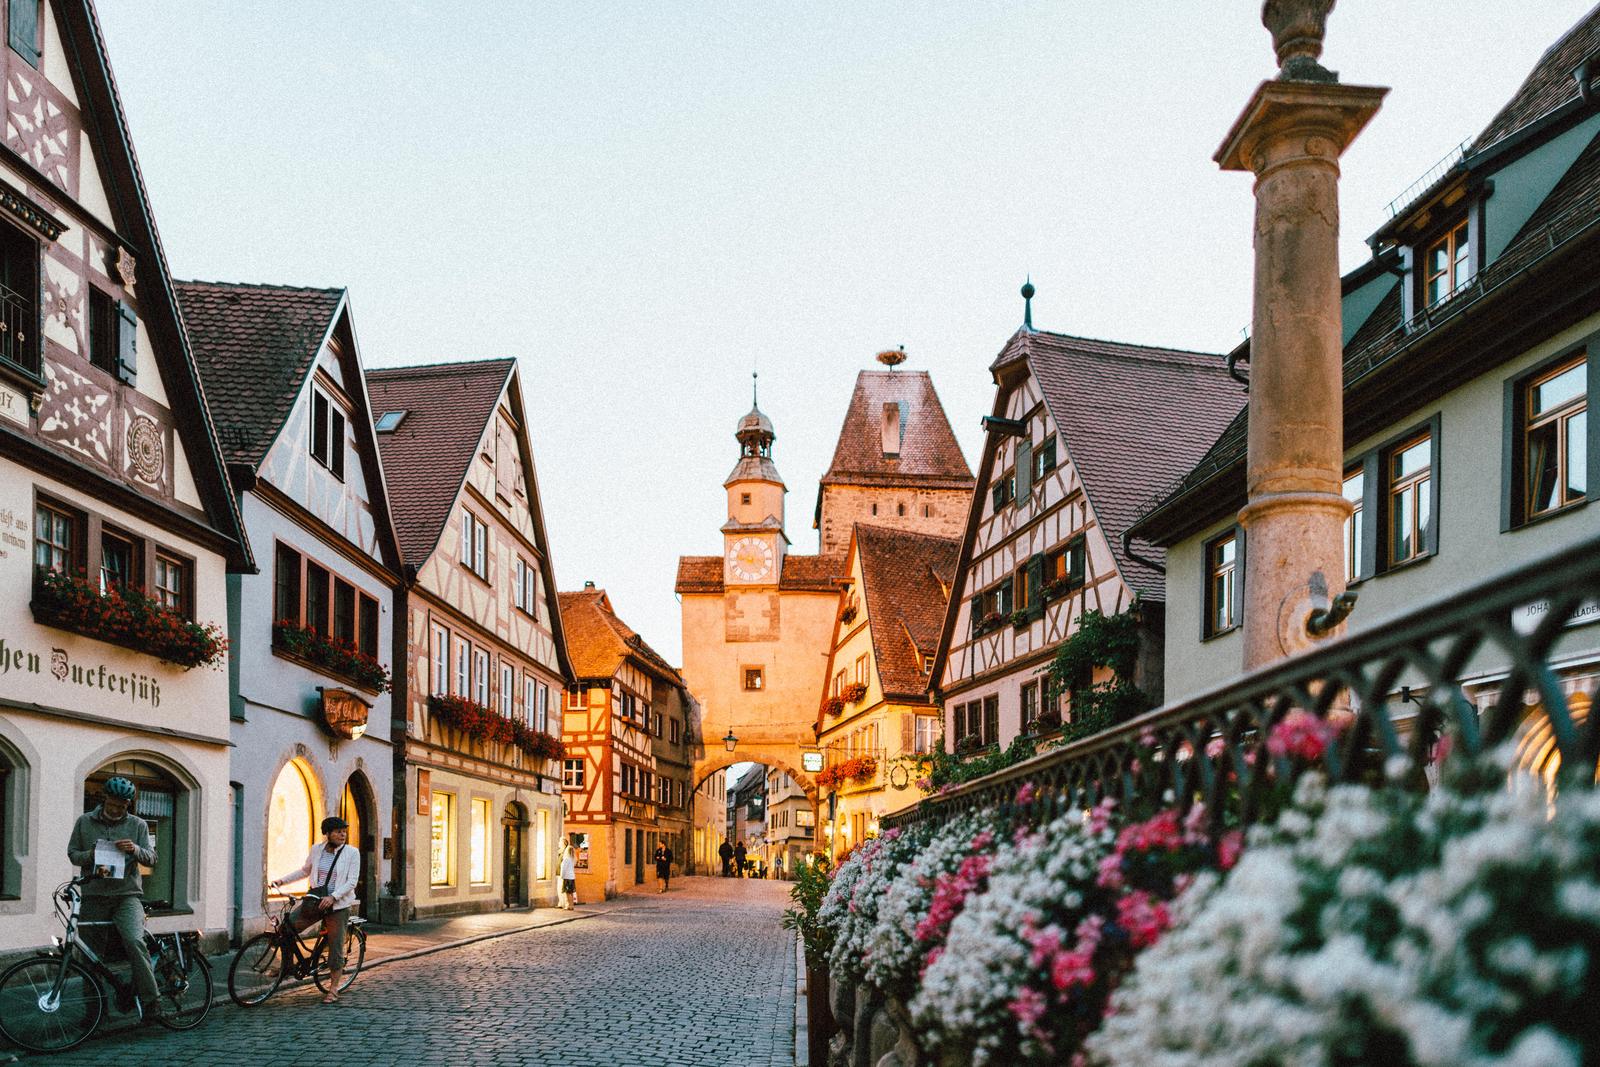 Wanna Know Where You’ll Meet Your Soulmate? ✈️ Go Around the World from “A” to “Z” to Find Out Once and for All Rothenburg, Germany